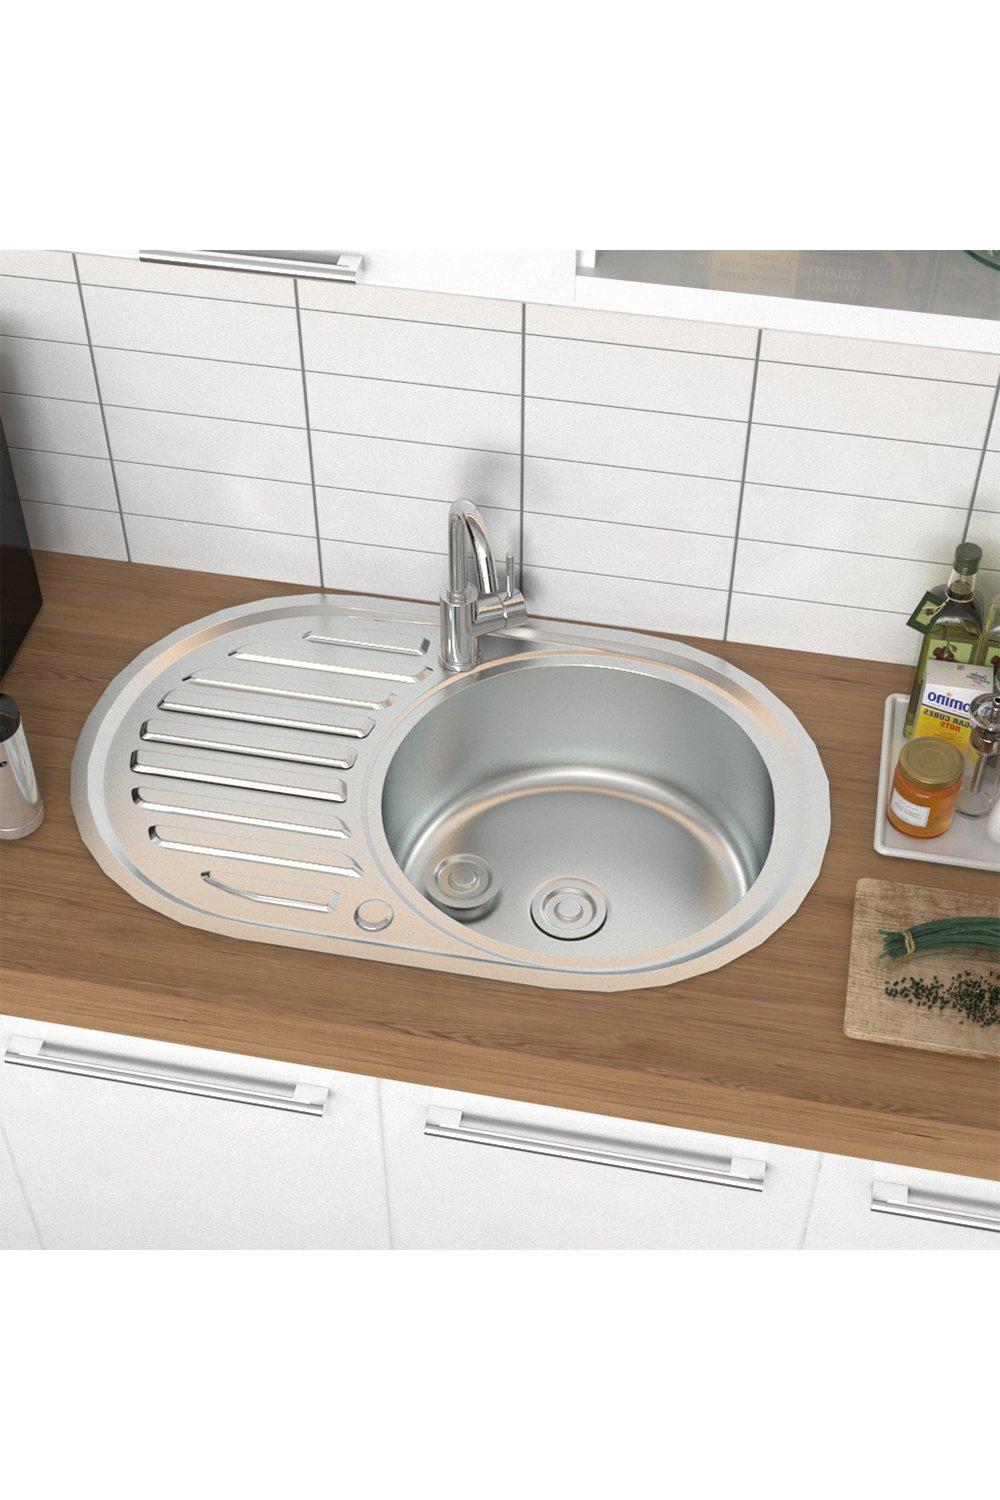 Large Inset Stainless Steel Kitchen Sink